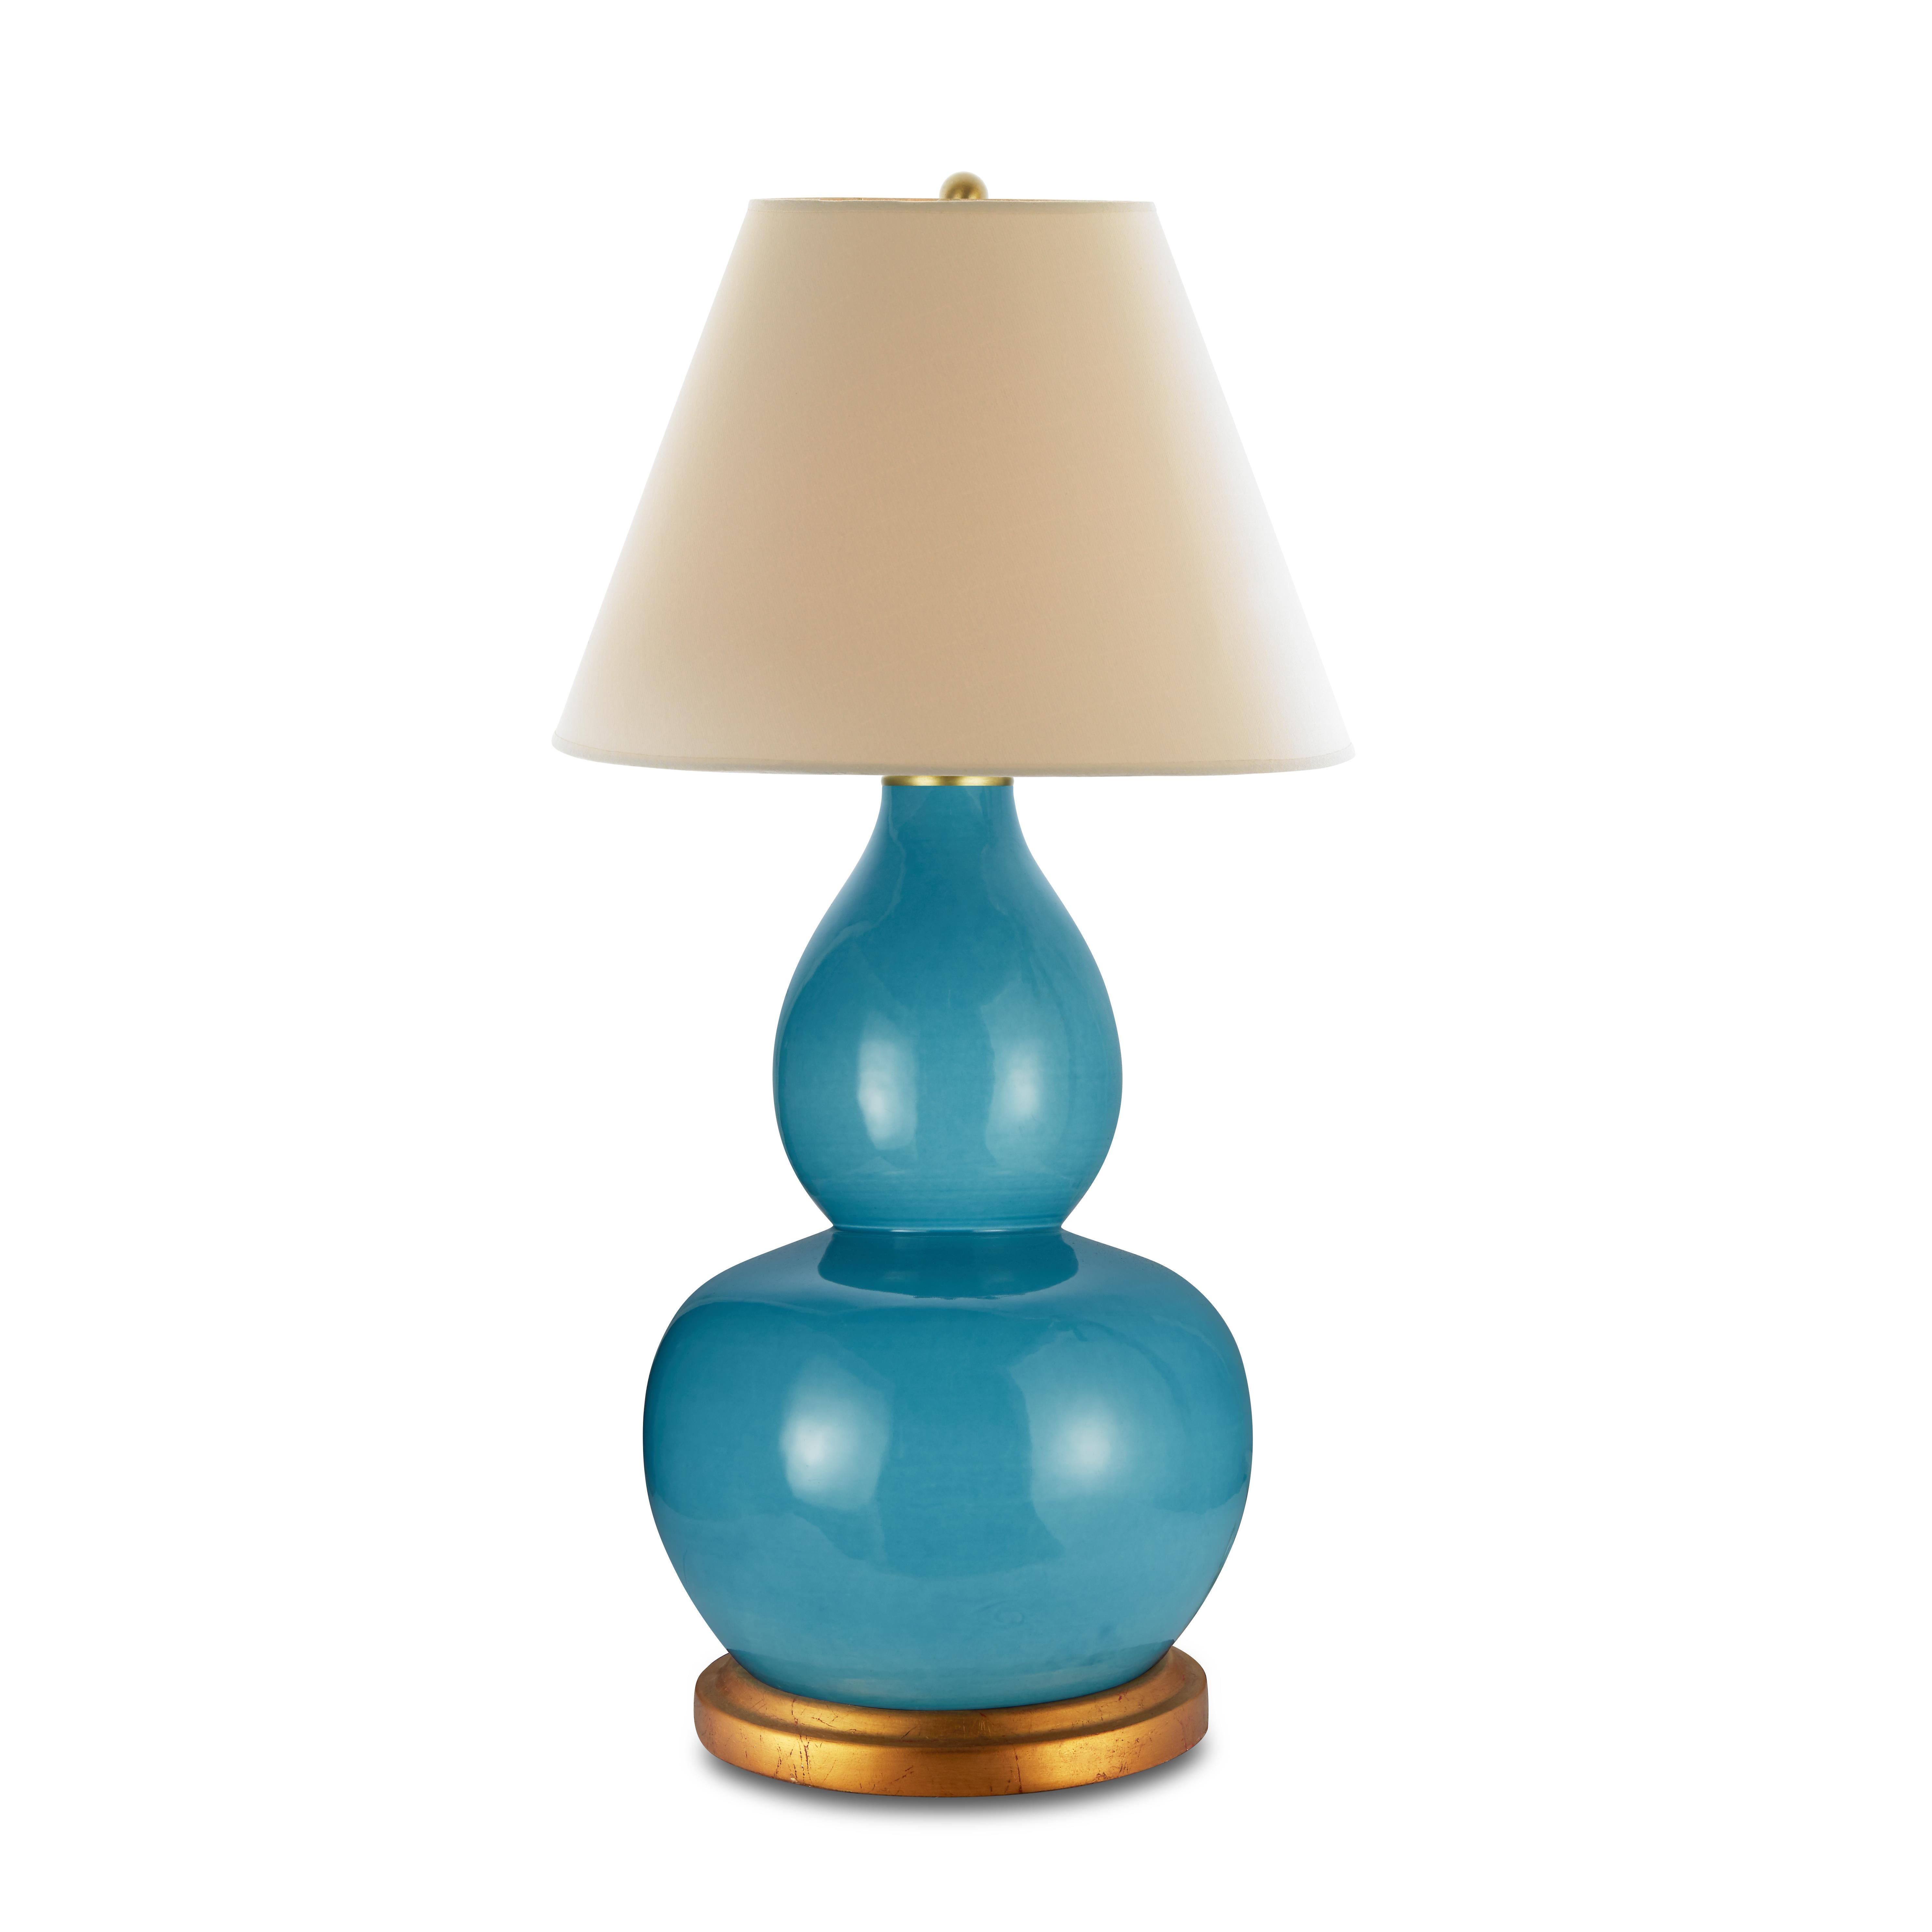 “Color is essential to life,” says Bunny. This spirited double gourd lamp brings the joyful essence of Caribbean Sea right into your home, and the gold gilt wedding band base enhances the striking blue color. Pair this lamp with mossy greens or